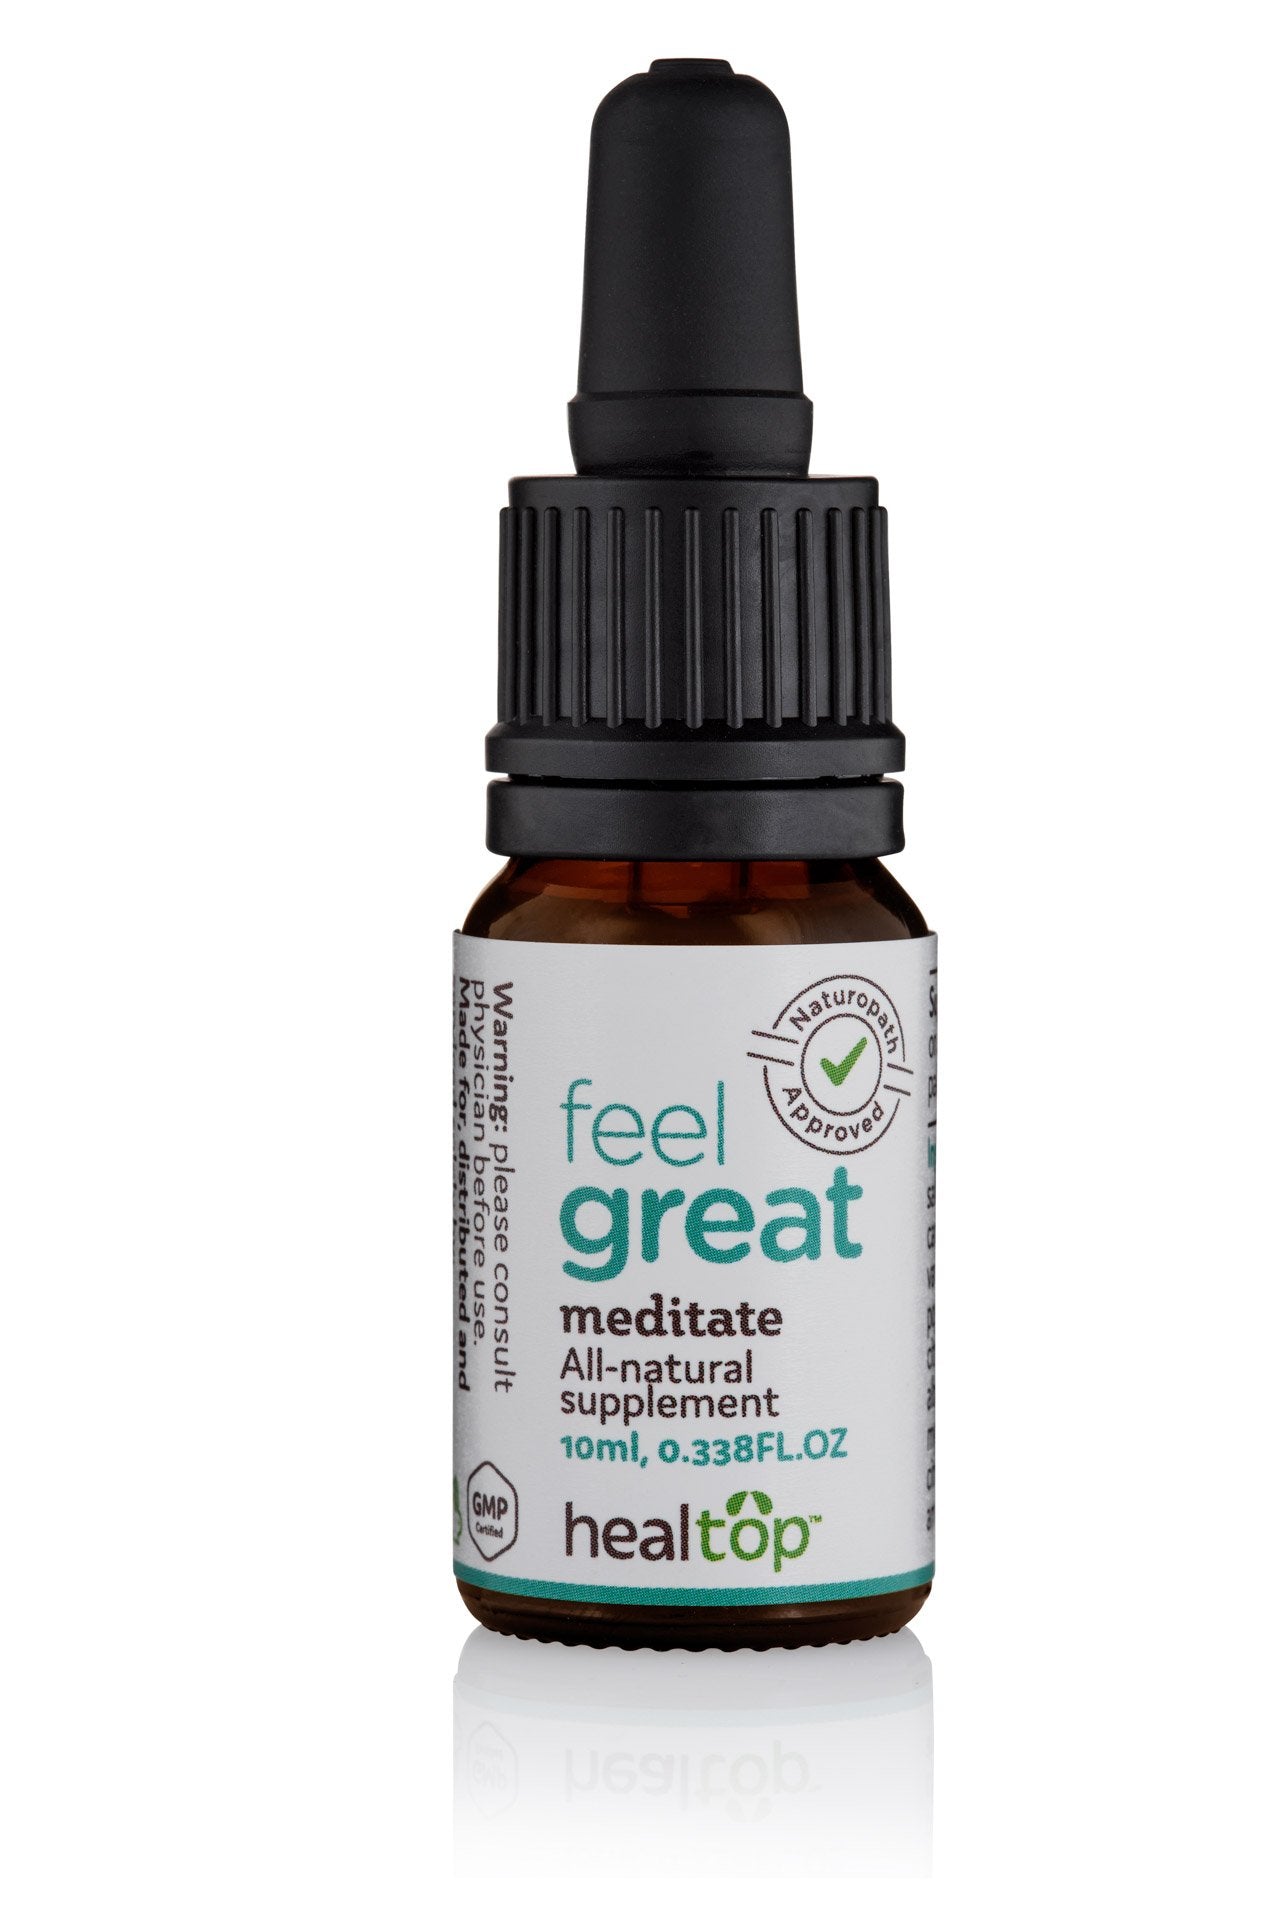 Meditate - All-Natural Supplement - feelgreat.co